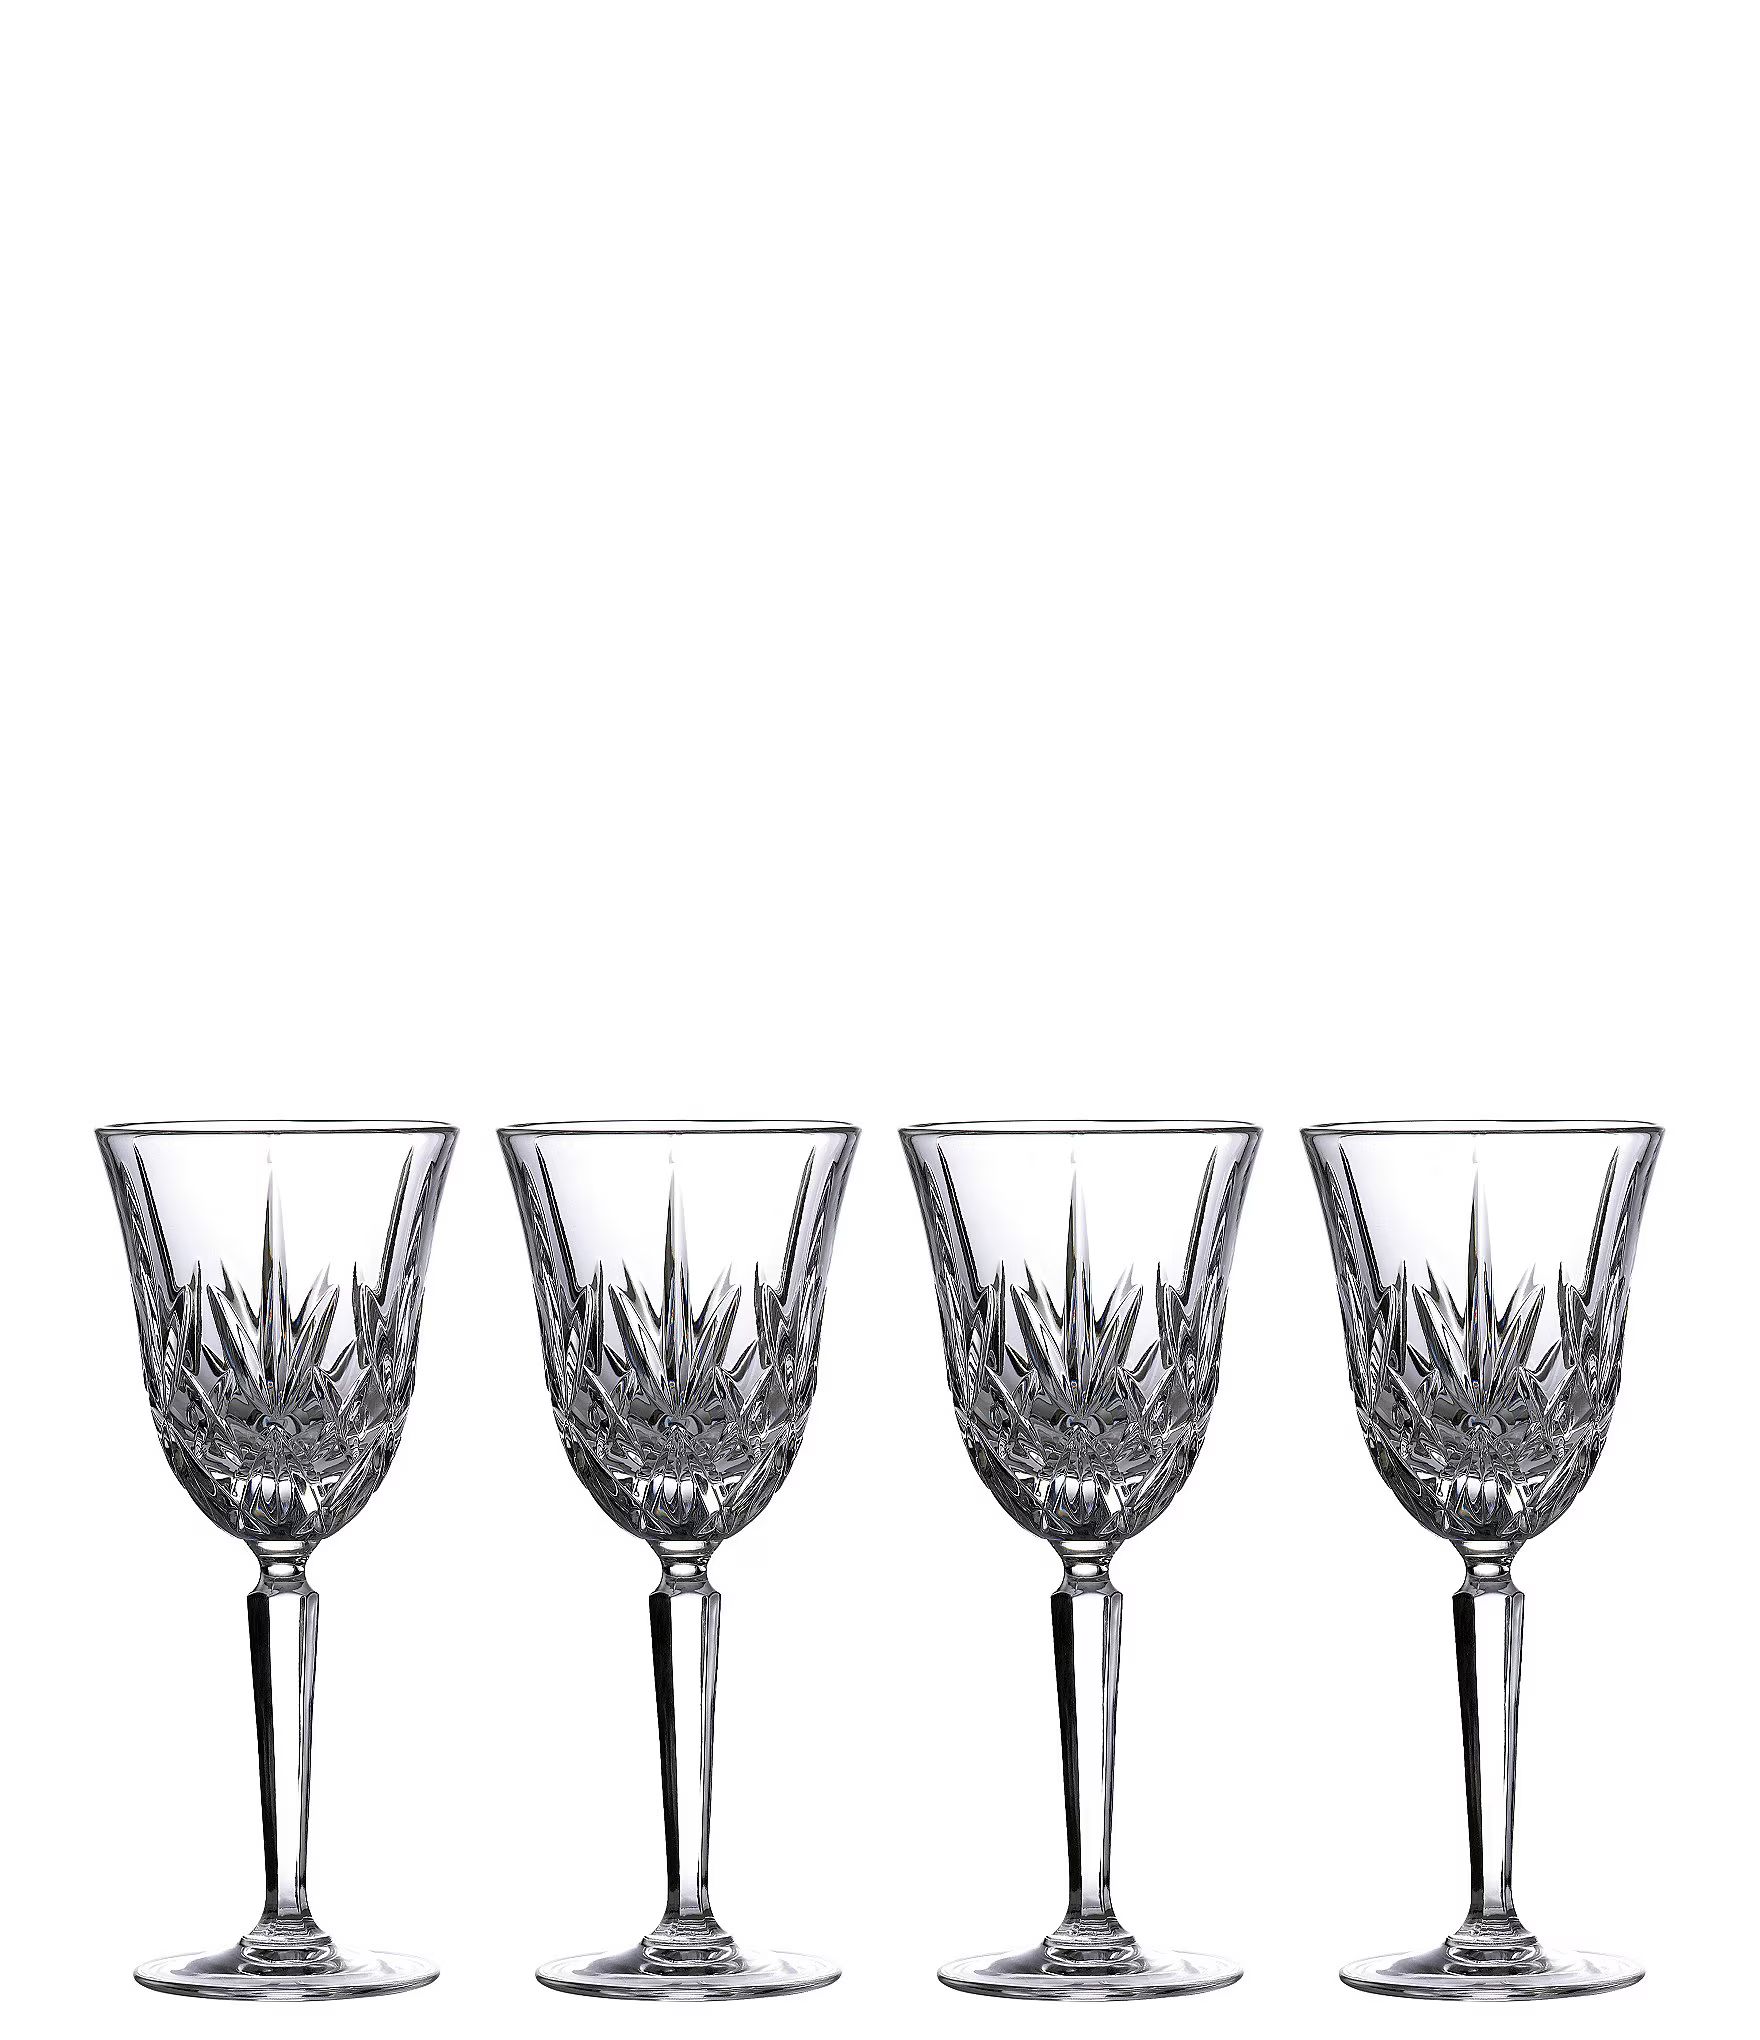 Marquis By Waterford Maxwell White Wine Glasses, Set of 4 | Dillard's